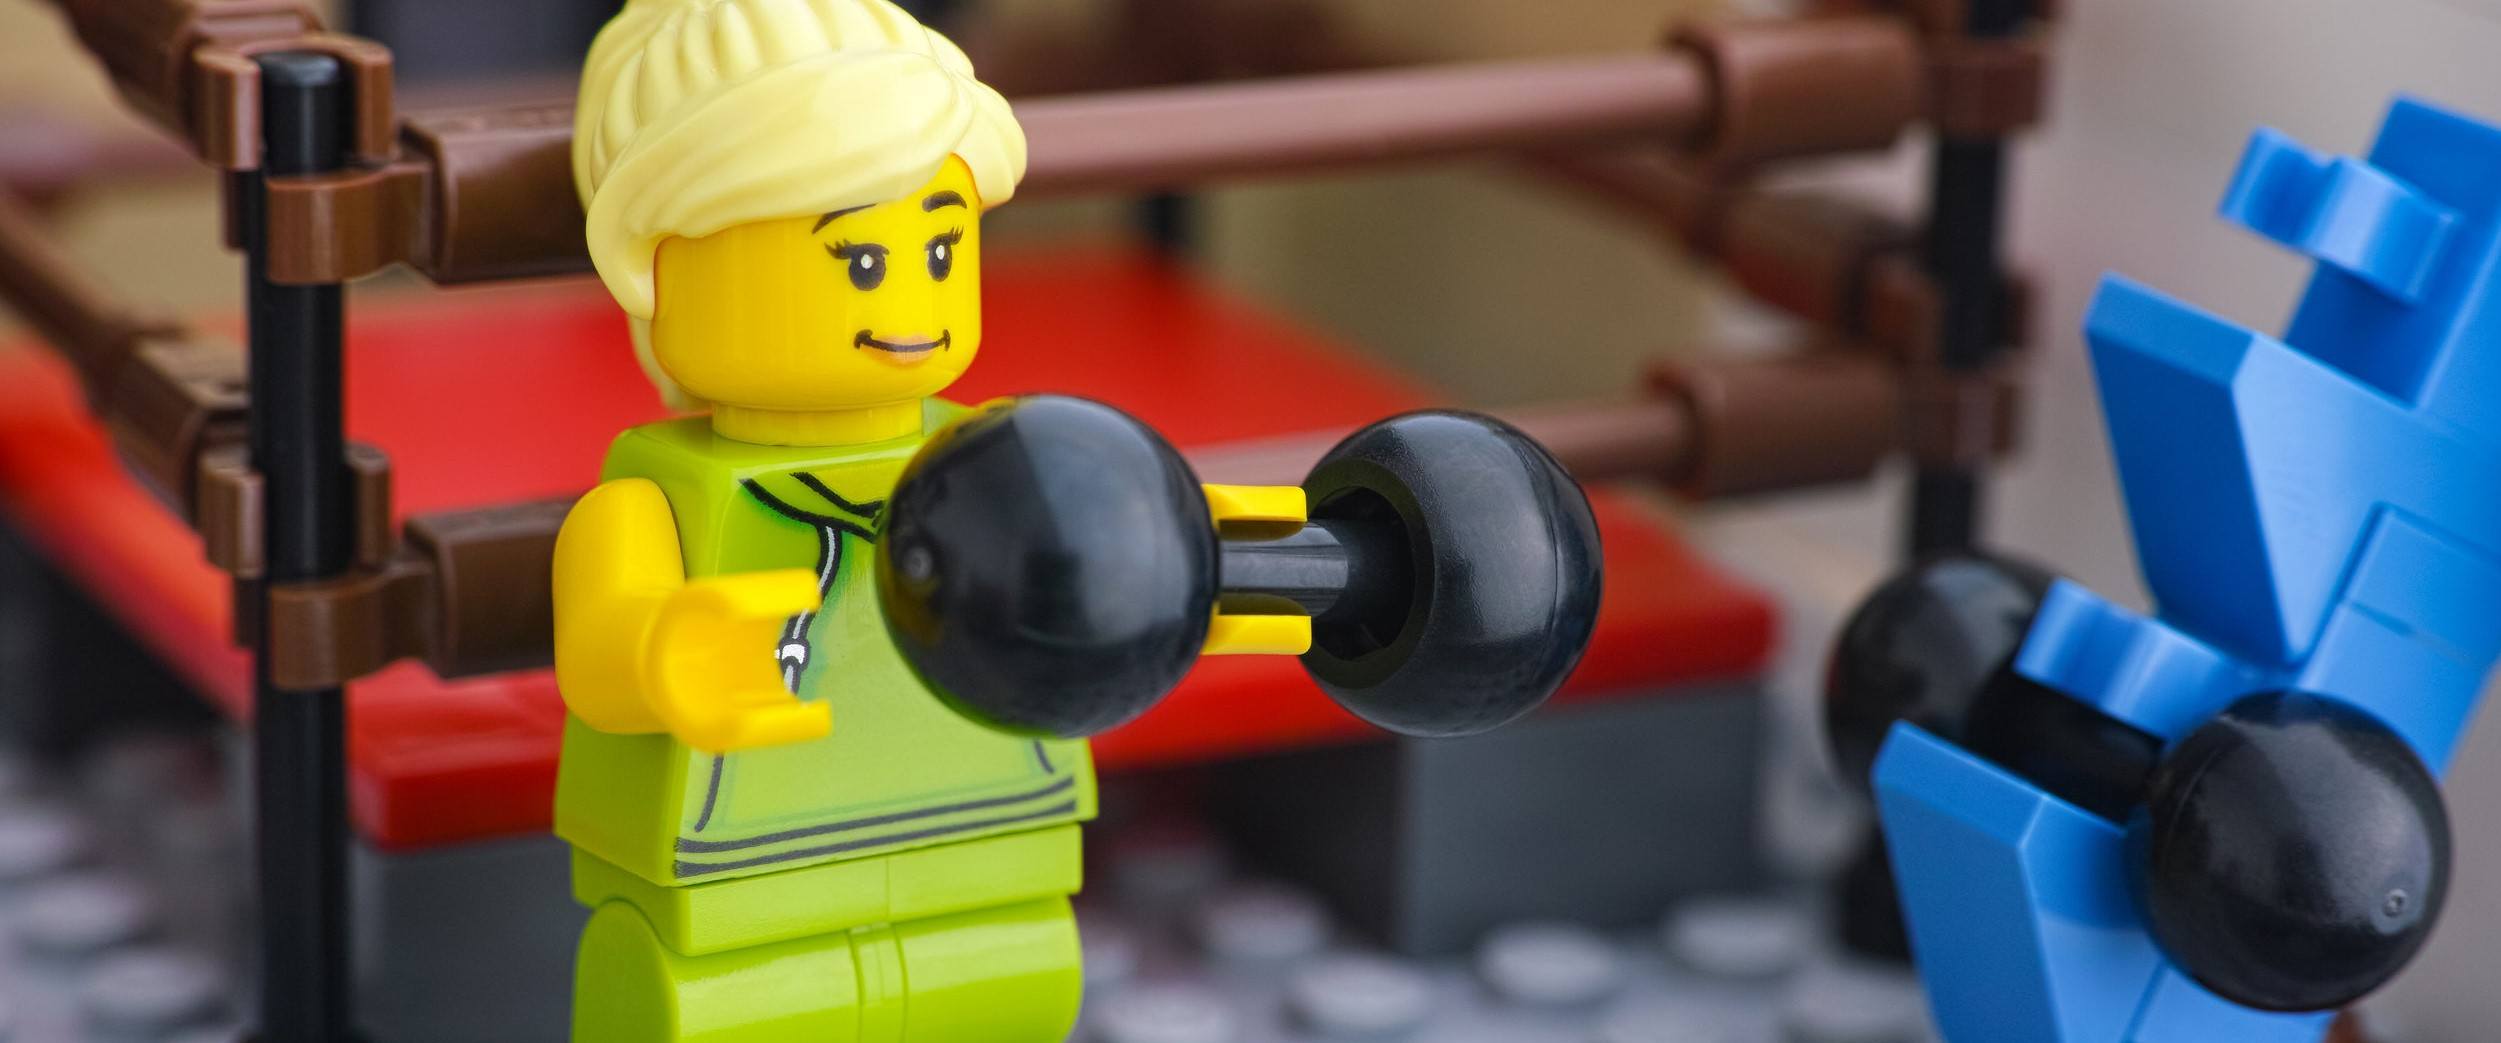 Lego woman minifigure lifting weights in a gym